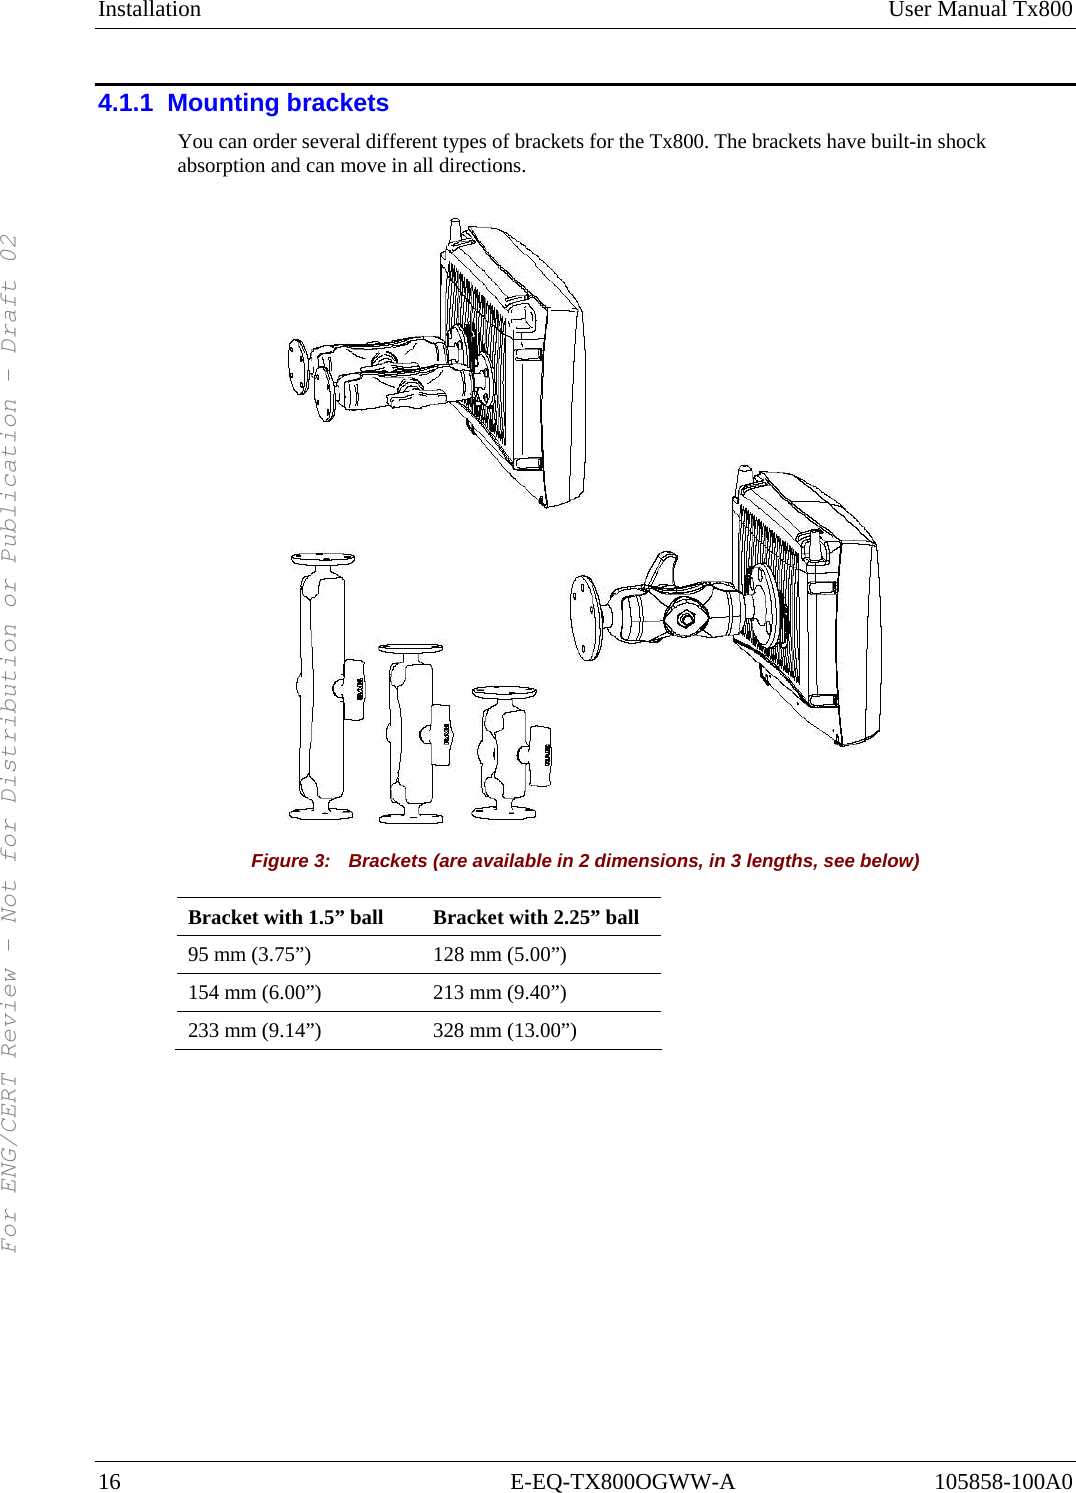 Installation User Manual Tx800 16 E-EQ-TX800OGWW-A 105858-100A0 4.1.1  Mounting brackets You can order several different types of brackets for the Tx800. The brackets have built-in shock absorption and can move in all directions.  Figure 3:    Brackets (are available in 2 dimensions, in 3 lengths, see below) Bracket with 1.5” ball  Bracket with 2.25” ball 95 mm (3.75”)  128 mm (5.00”) 154 mm (6.00”)  213 mm (9.40”) 233 mm (9.14”)  328 mm (13.00”) For ENG/CERT Review - Not for Distribution or Publication - Draft 02